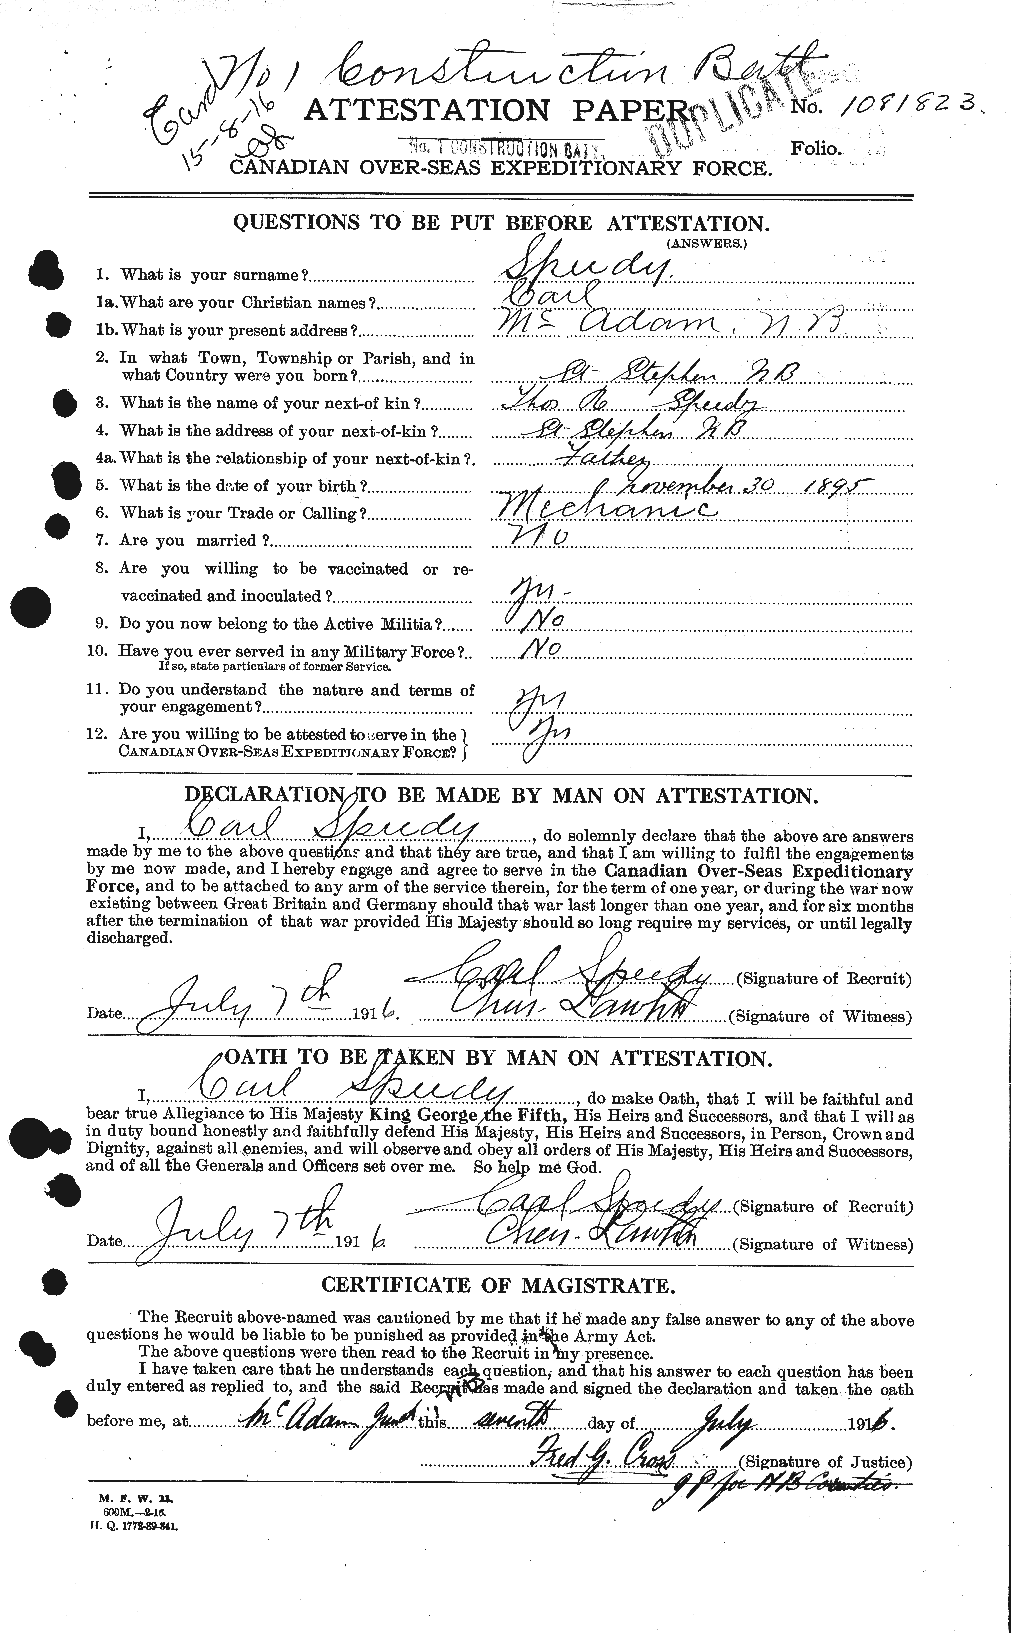 Personnel Records of the First World War - CEF 110301a